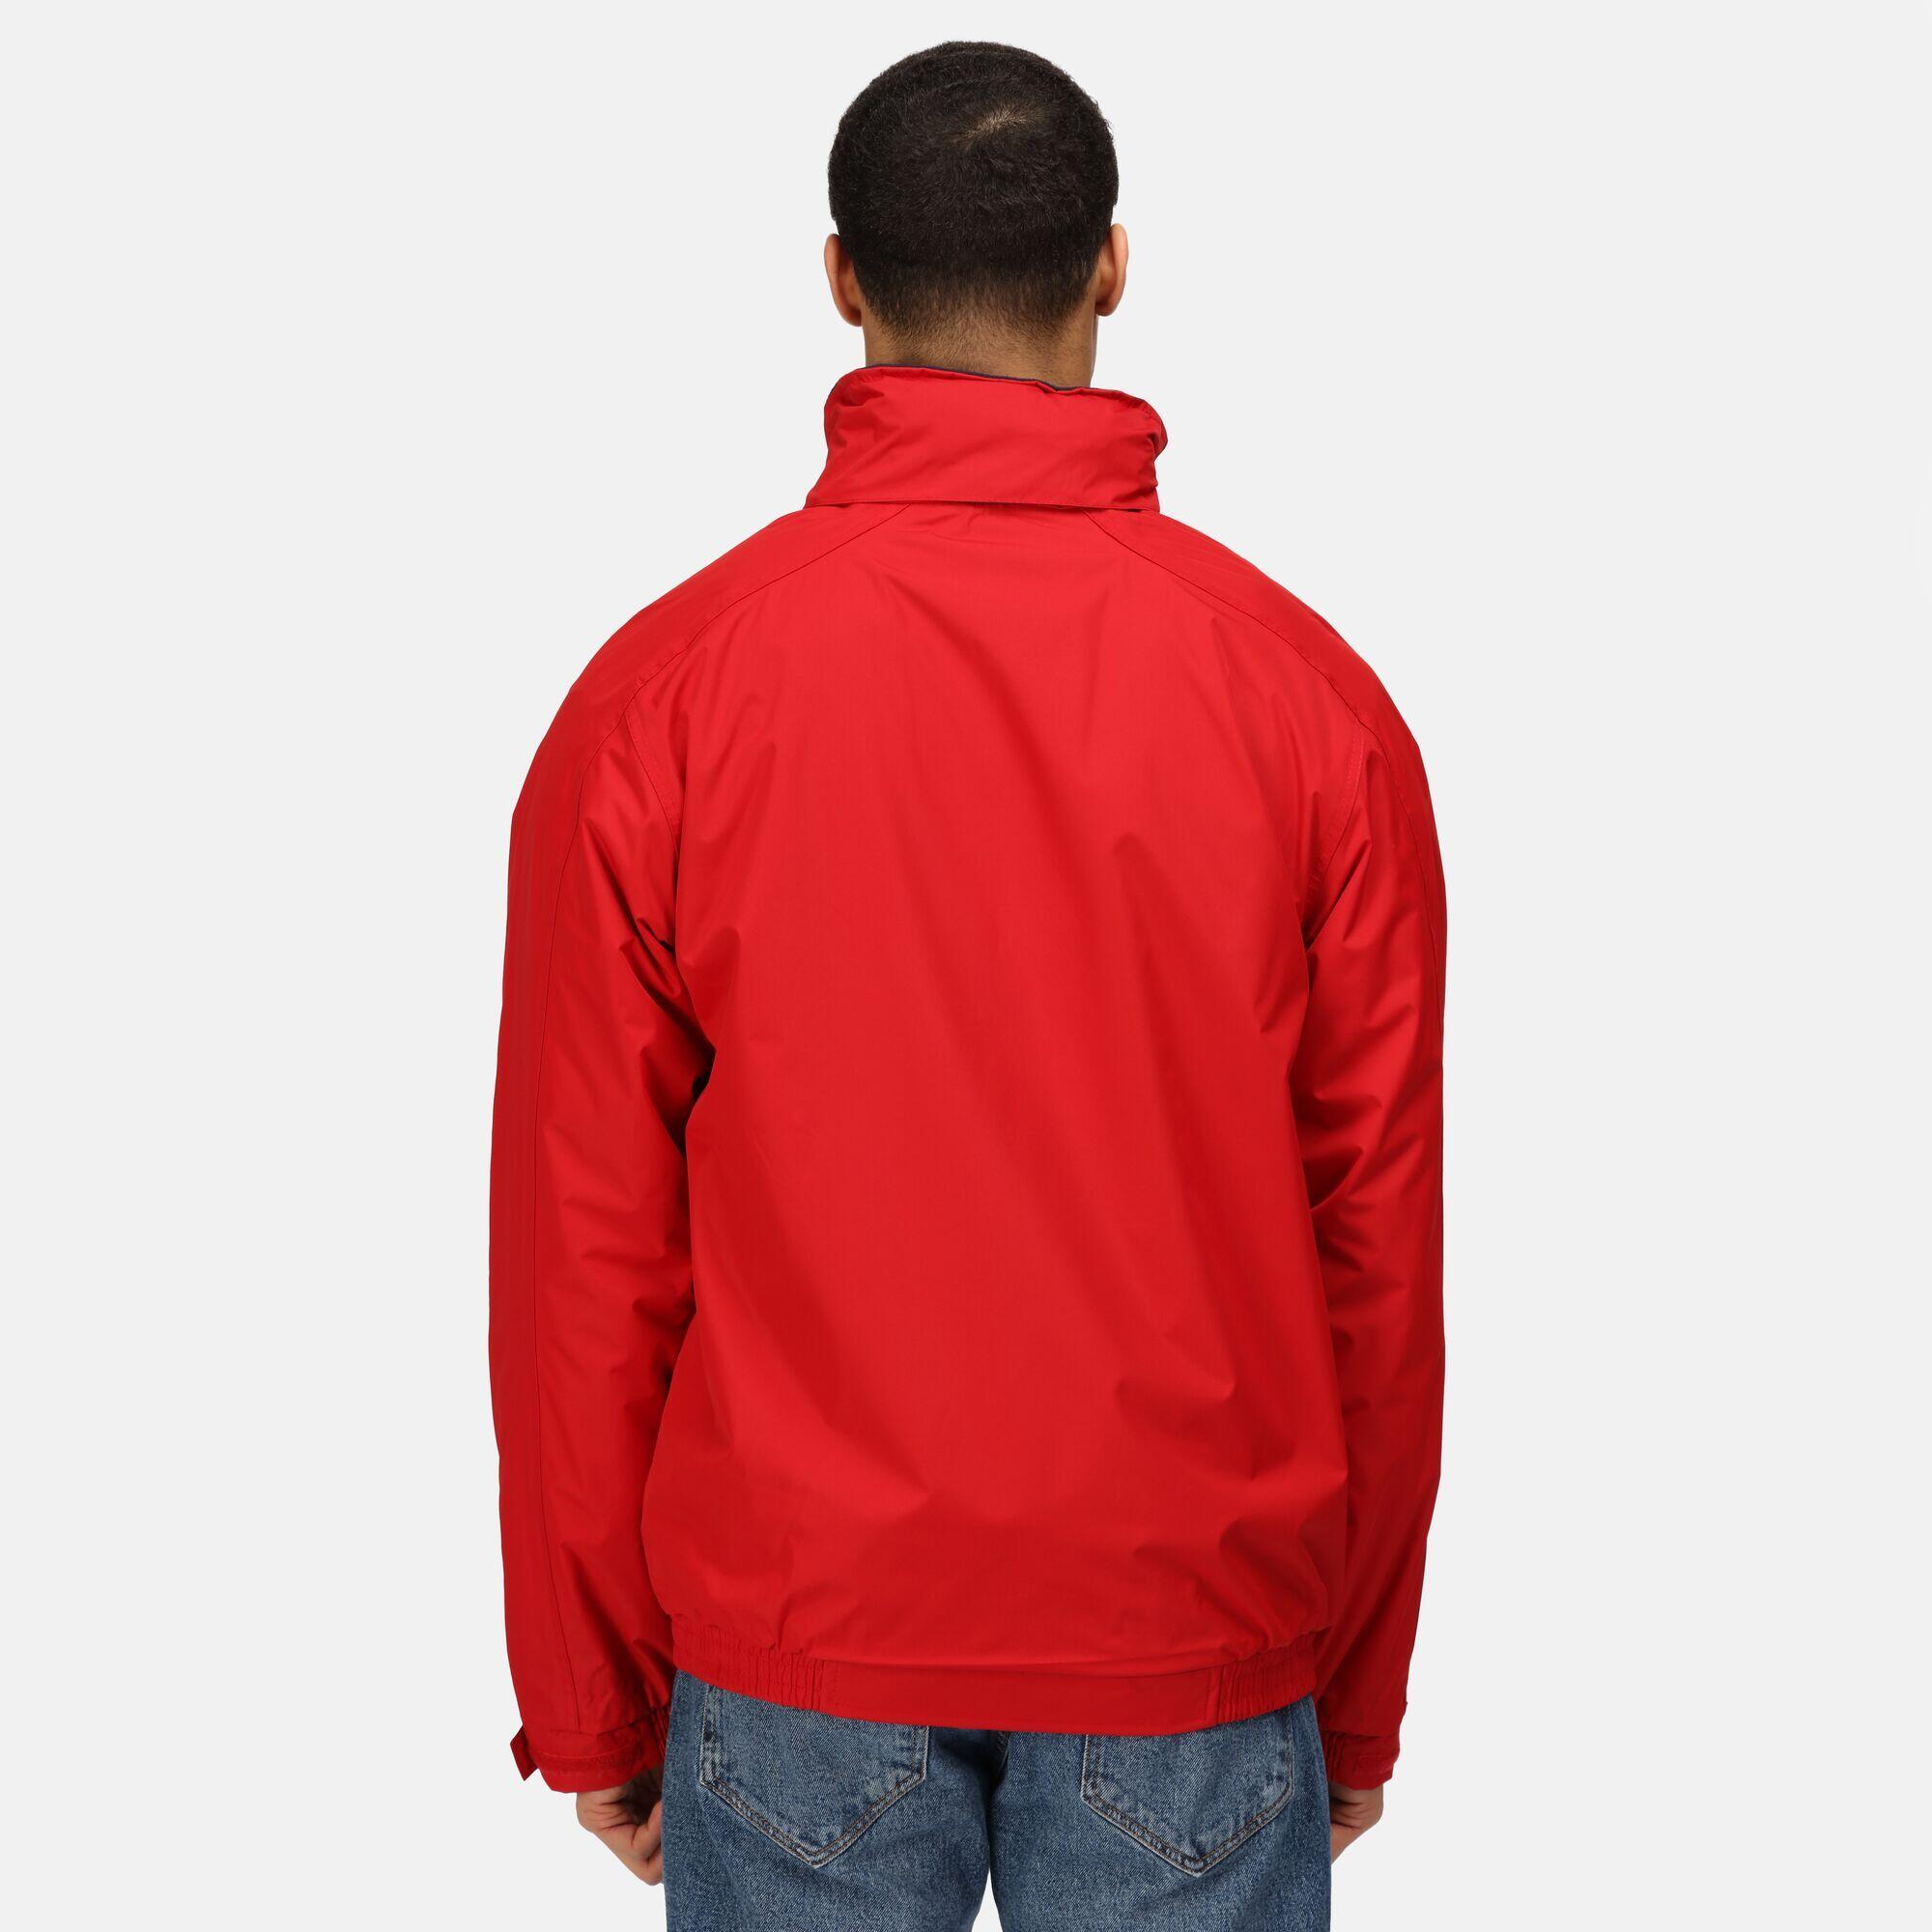 Dover Waterproof Windproof Jacket (ThermoGuard Insulation) (Classic Red/Navy) 2/5